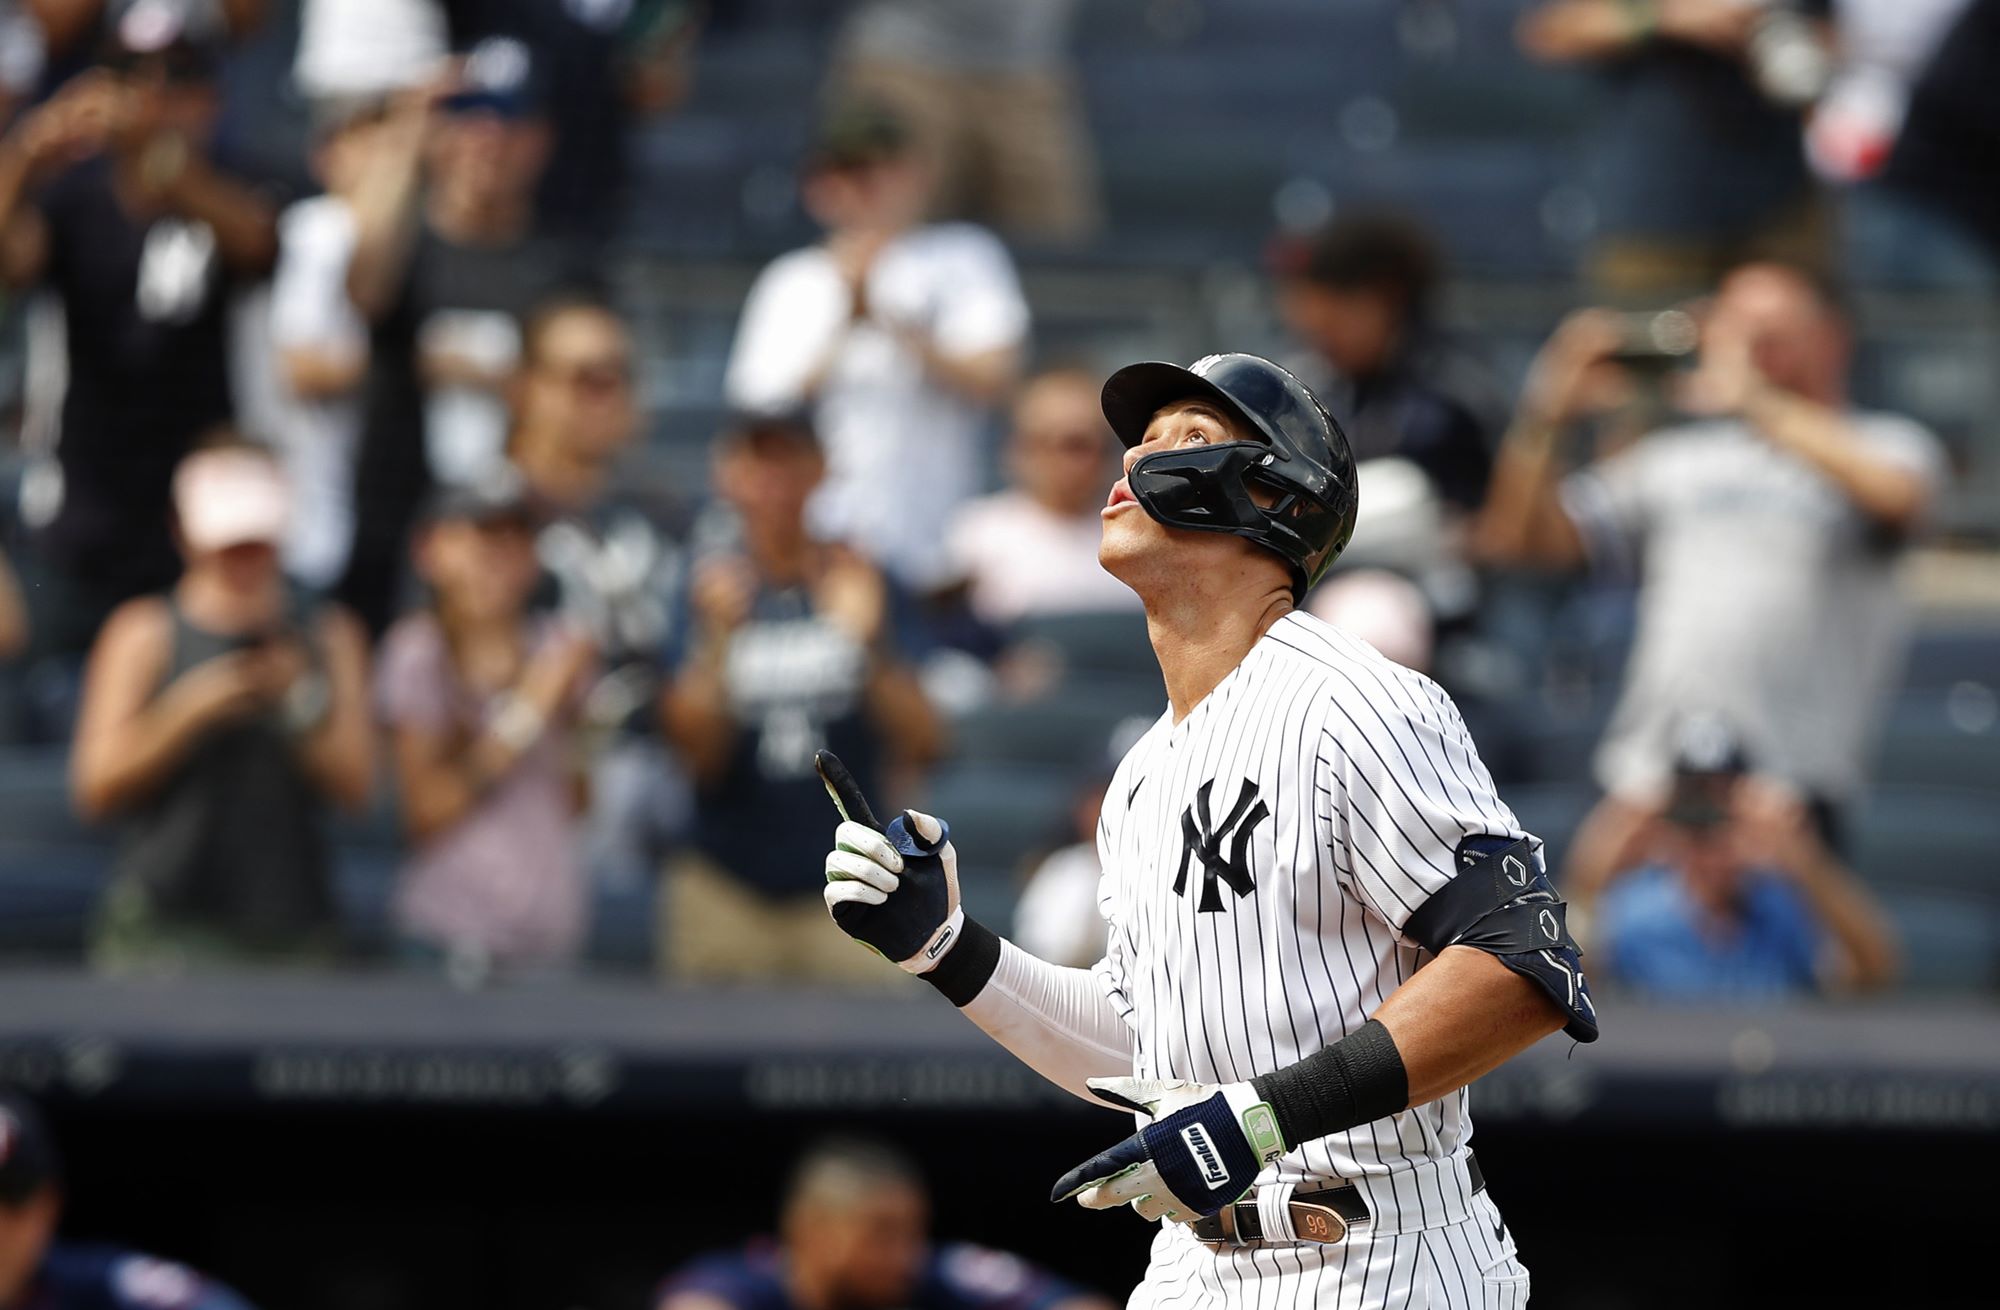 How To Watch Ny Yankees On Amazon Prime